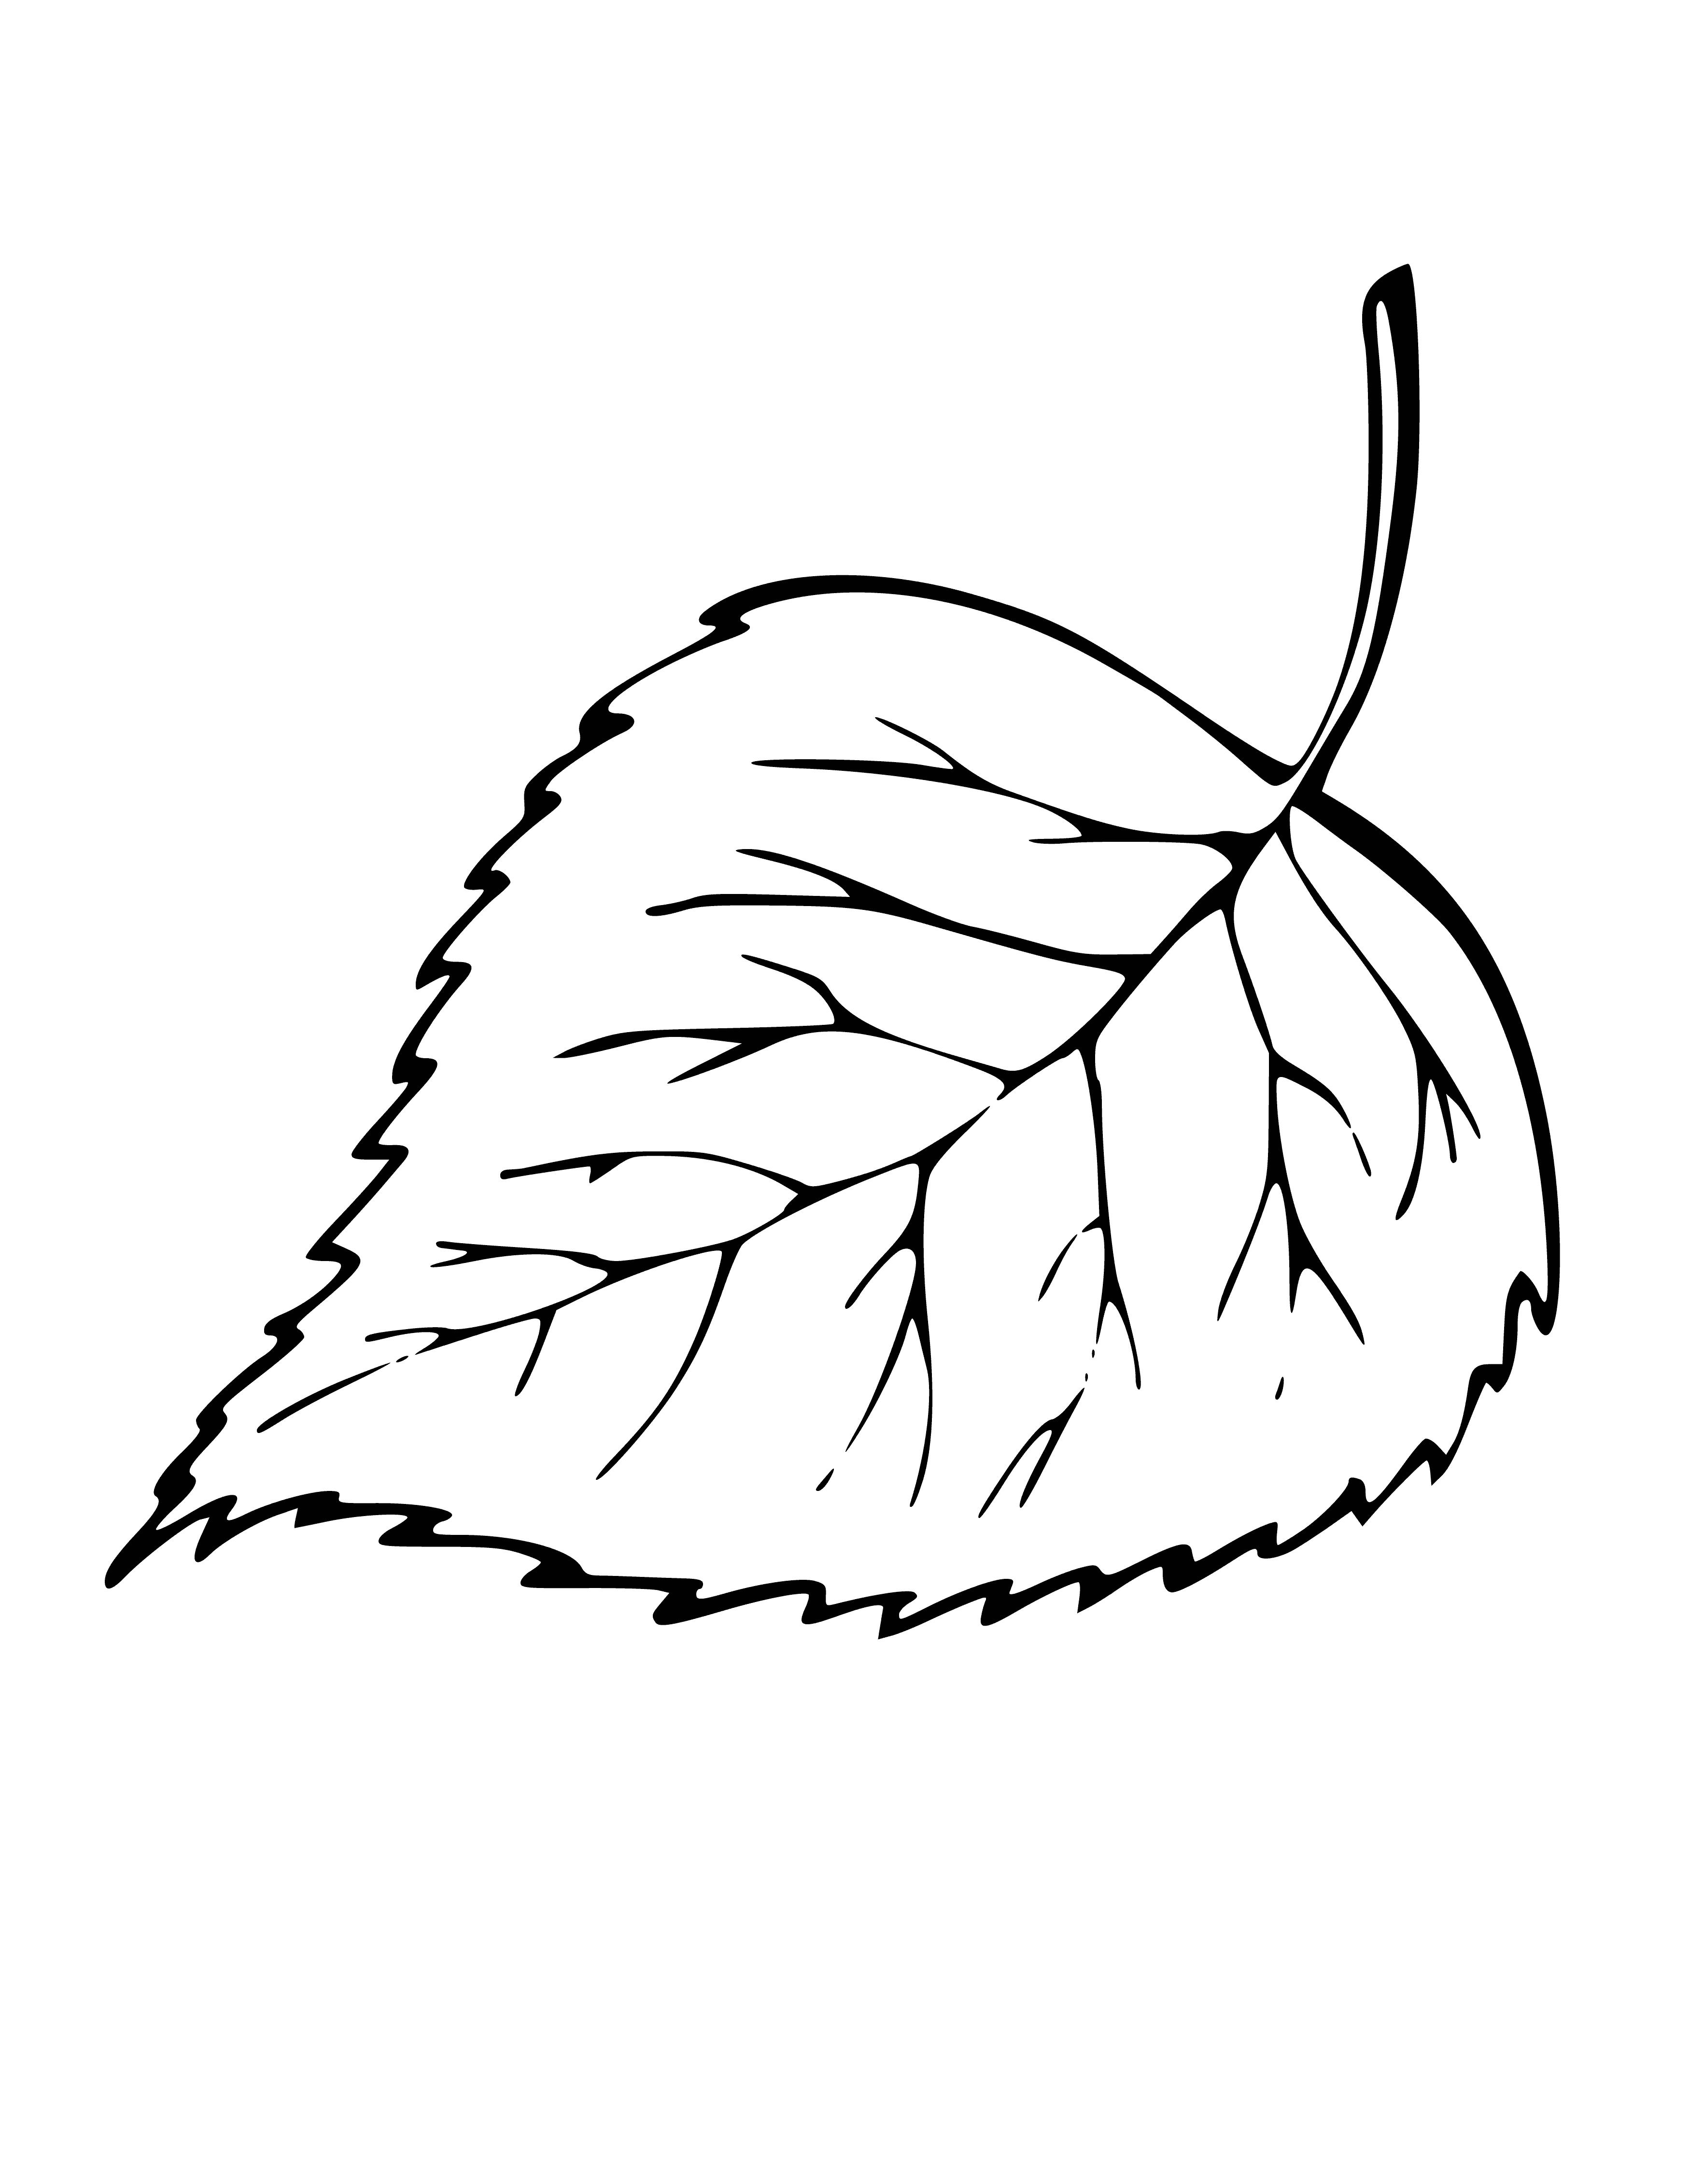 coloring page: Ovate, serrated leaf w/asym tip, bright green top, silver-white veins, pale green bottom, long petiole w/small brown stipule, small stem-like structure to stipule, small brown bud at base. No fruits or flowers.